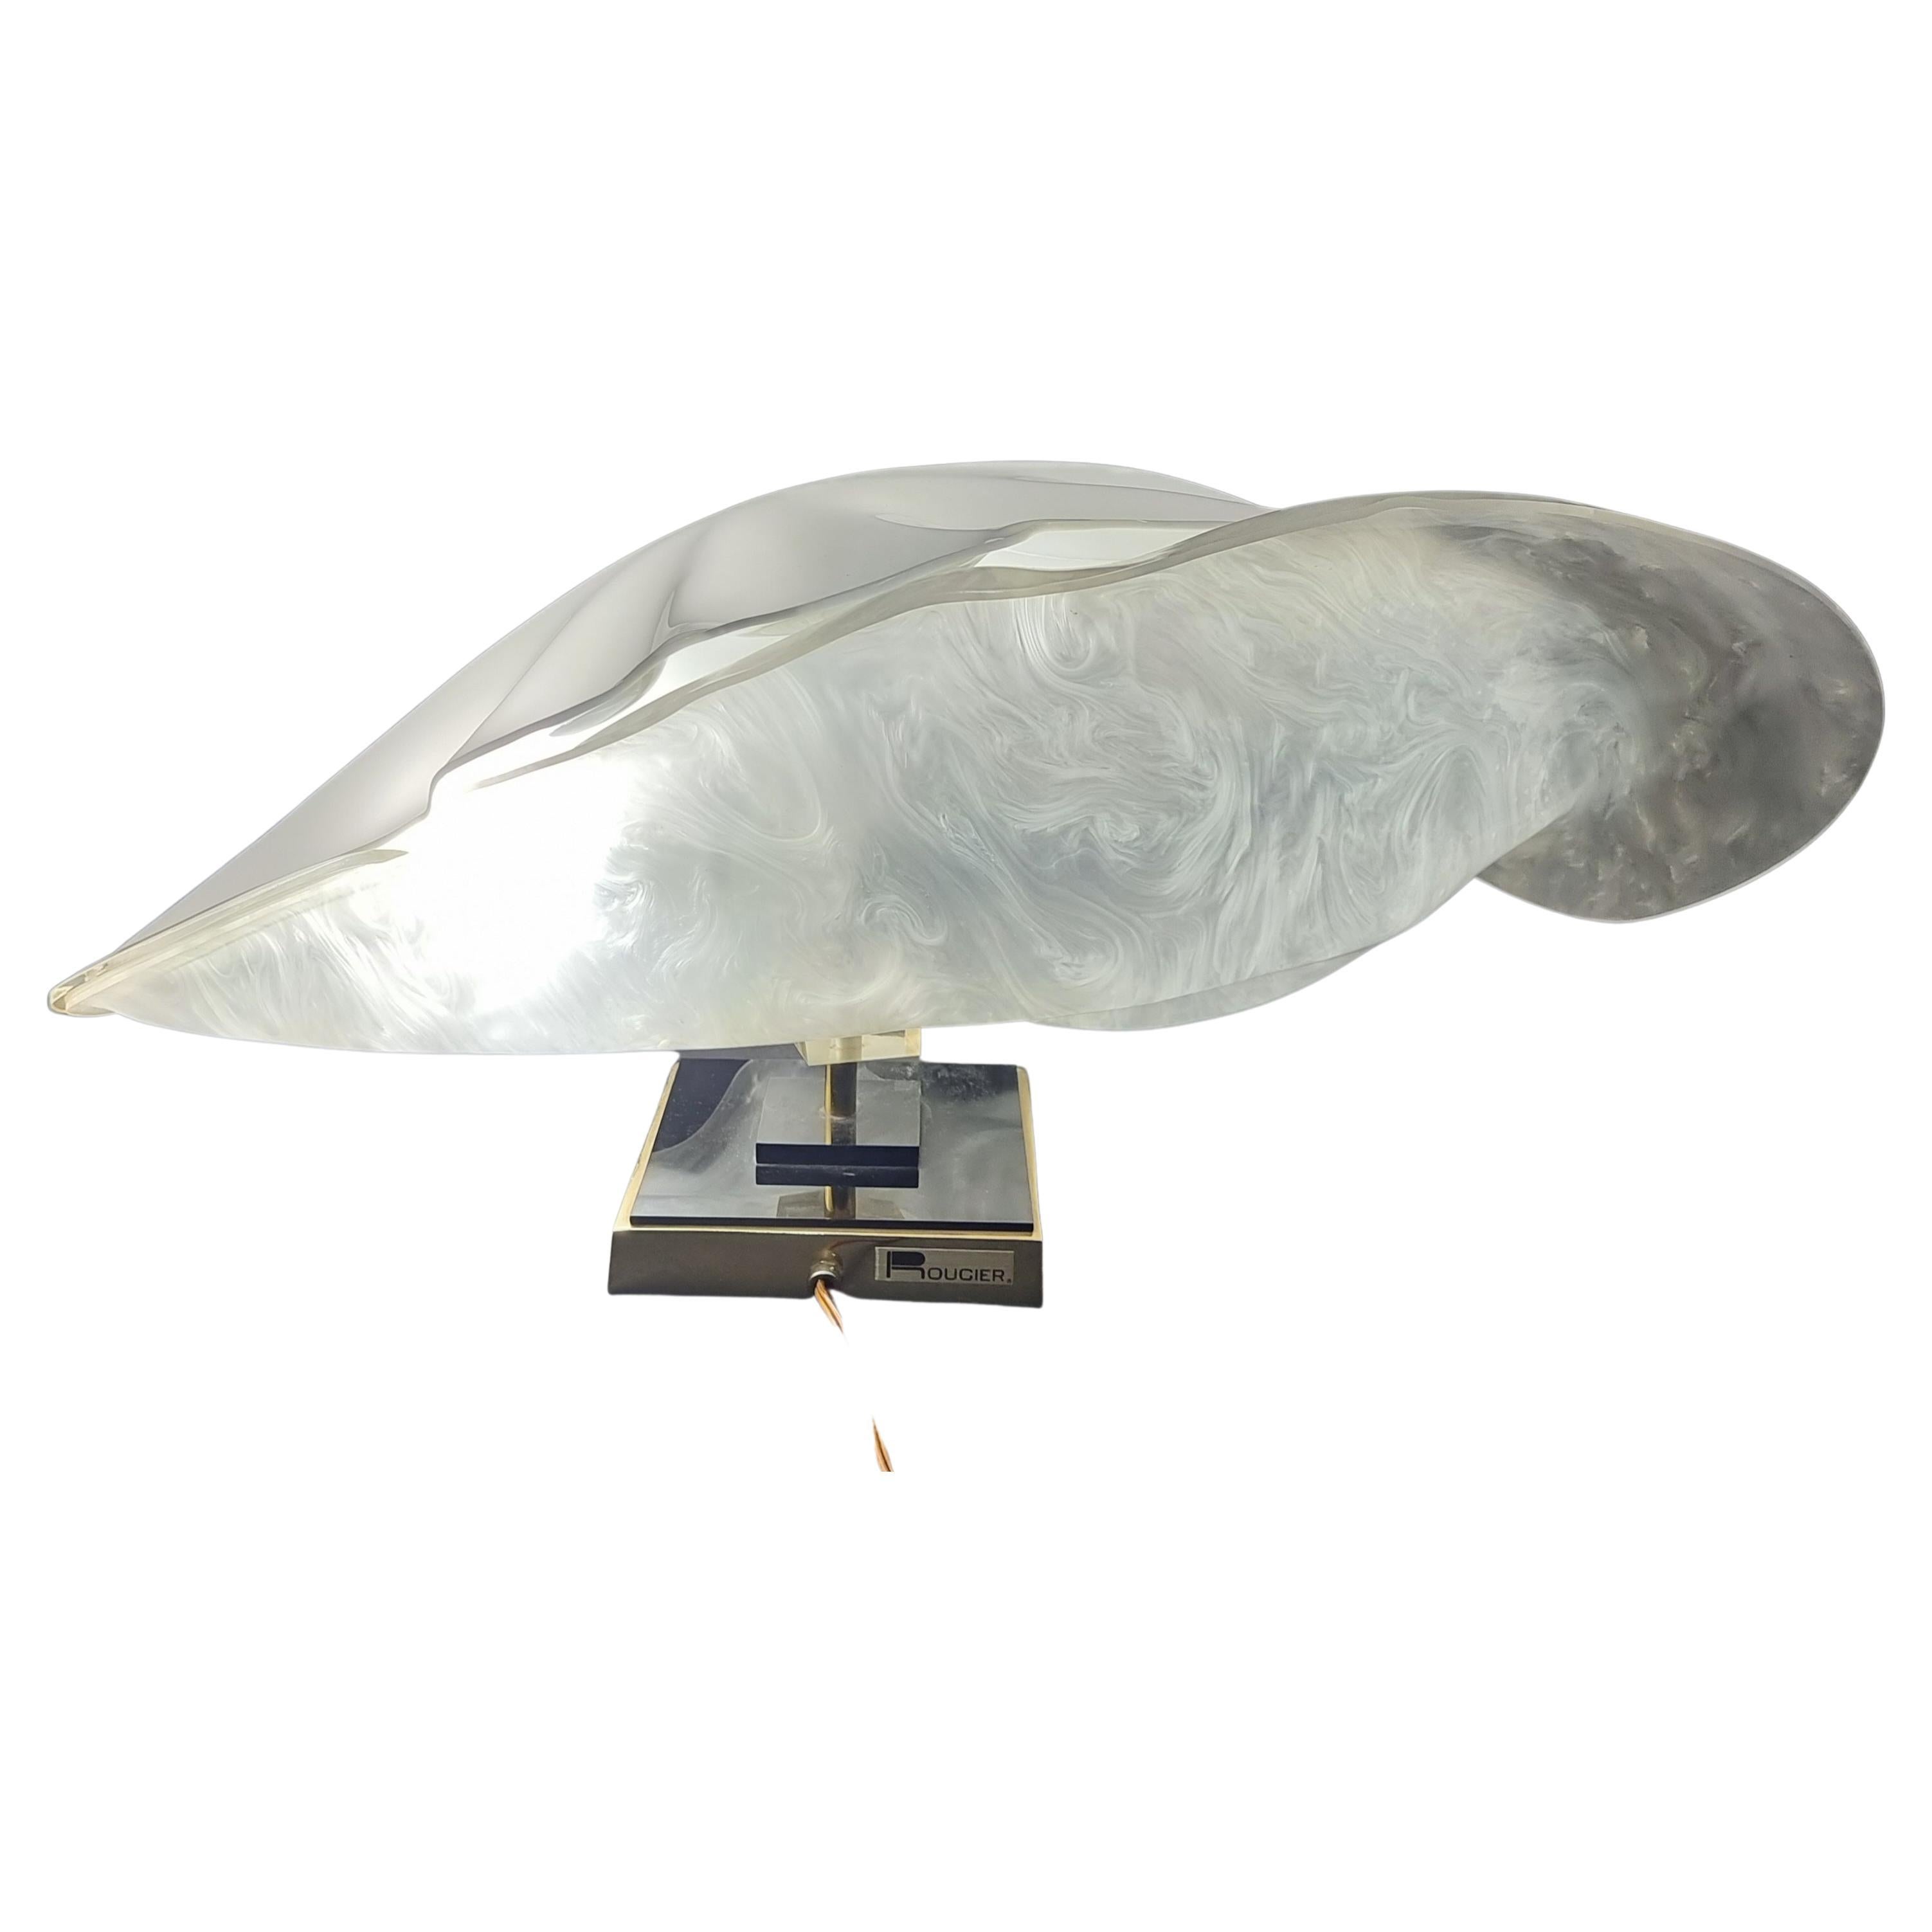 Impressive Vintage Roger Rougier Acrylic Shell Form Table Lamp For Sale